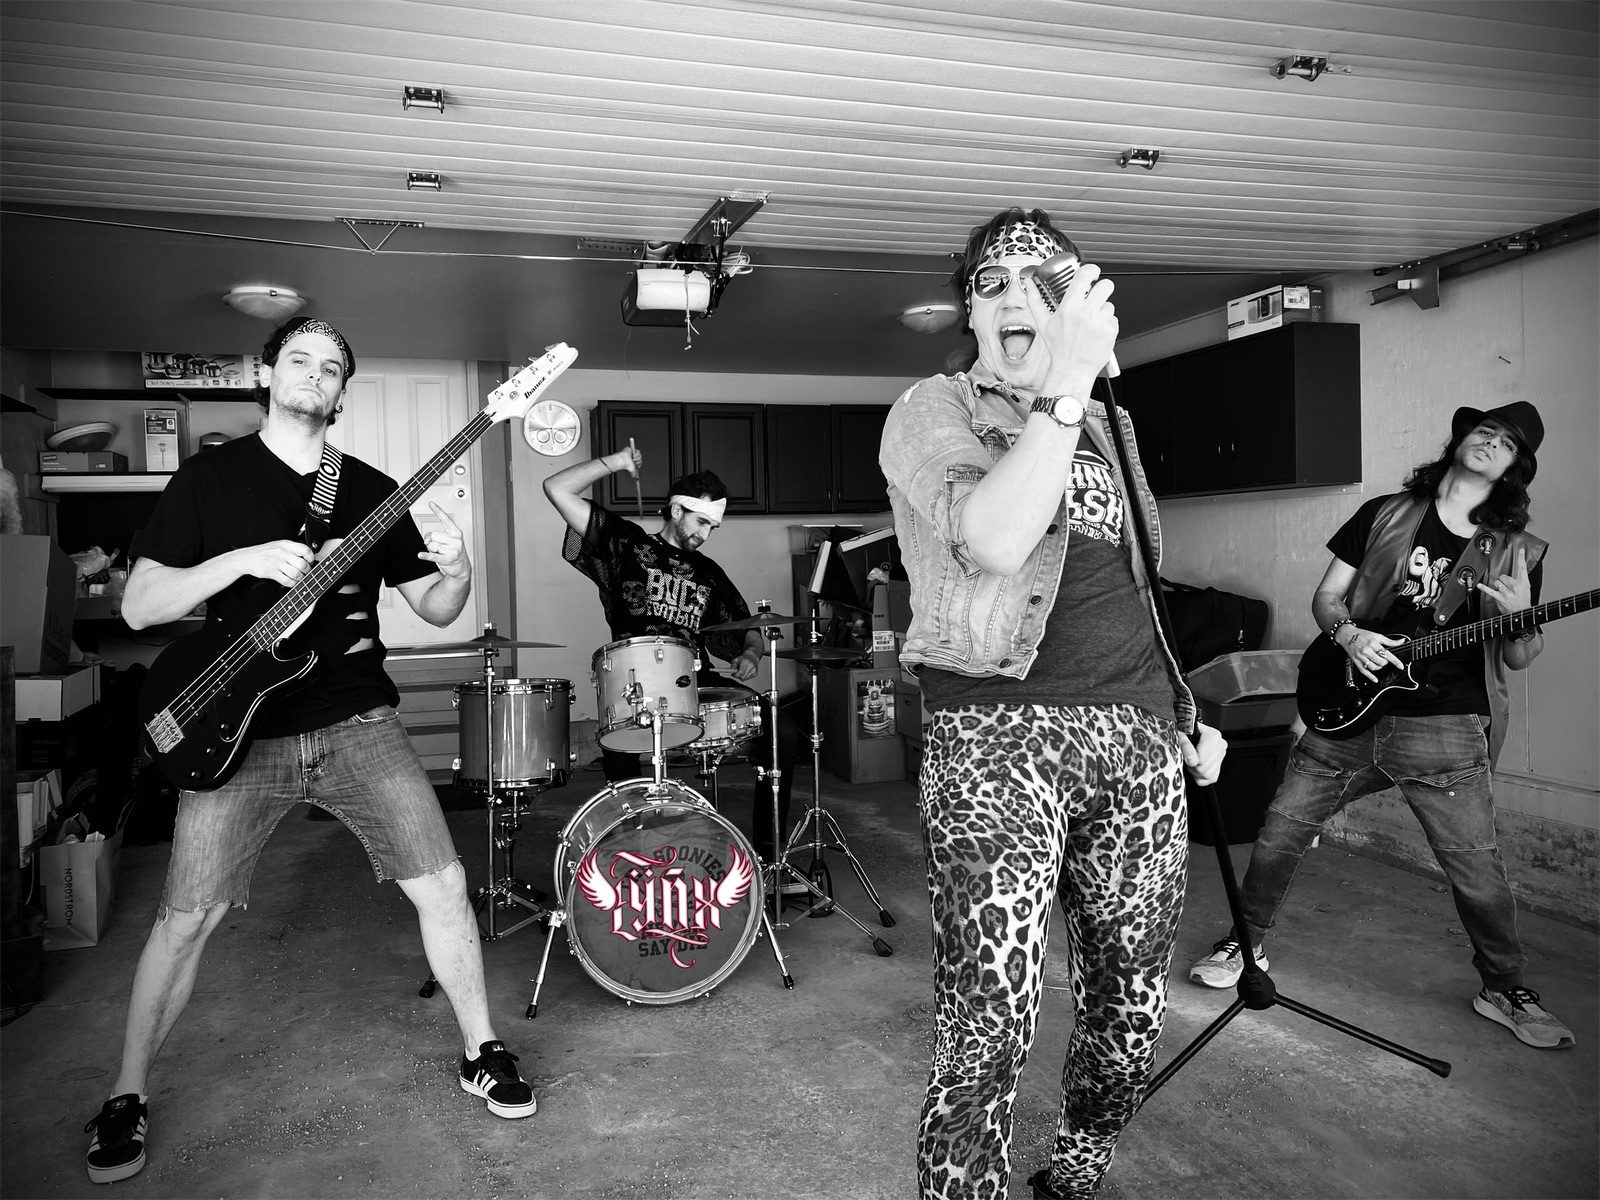 ‘Lÿnx’ release their second EP ‘Long Live Rock n’ Roll’ produced by Bullzhorn Records in Canada.